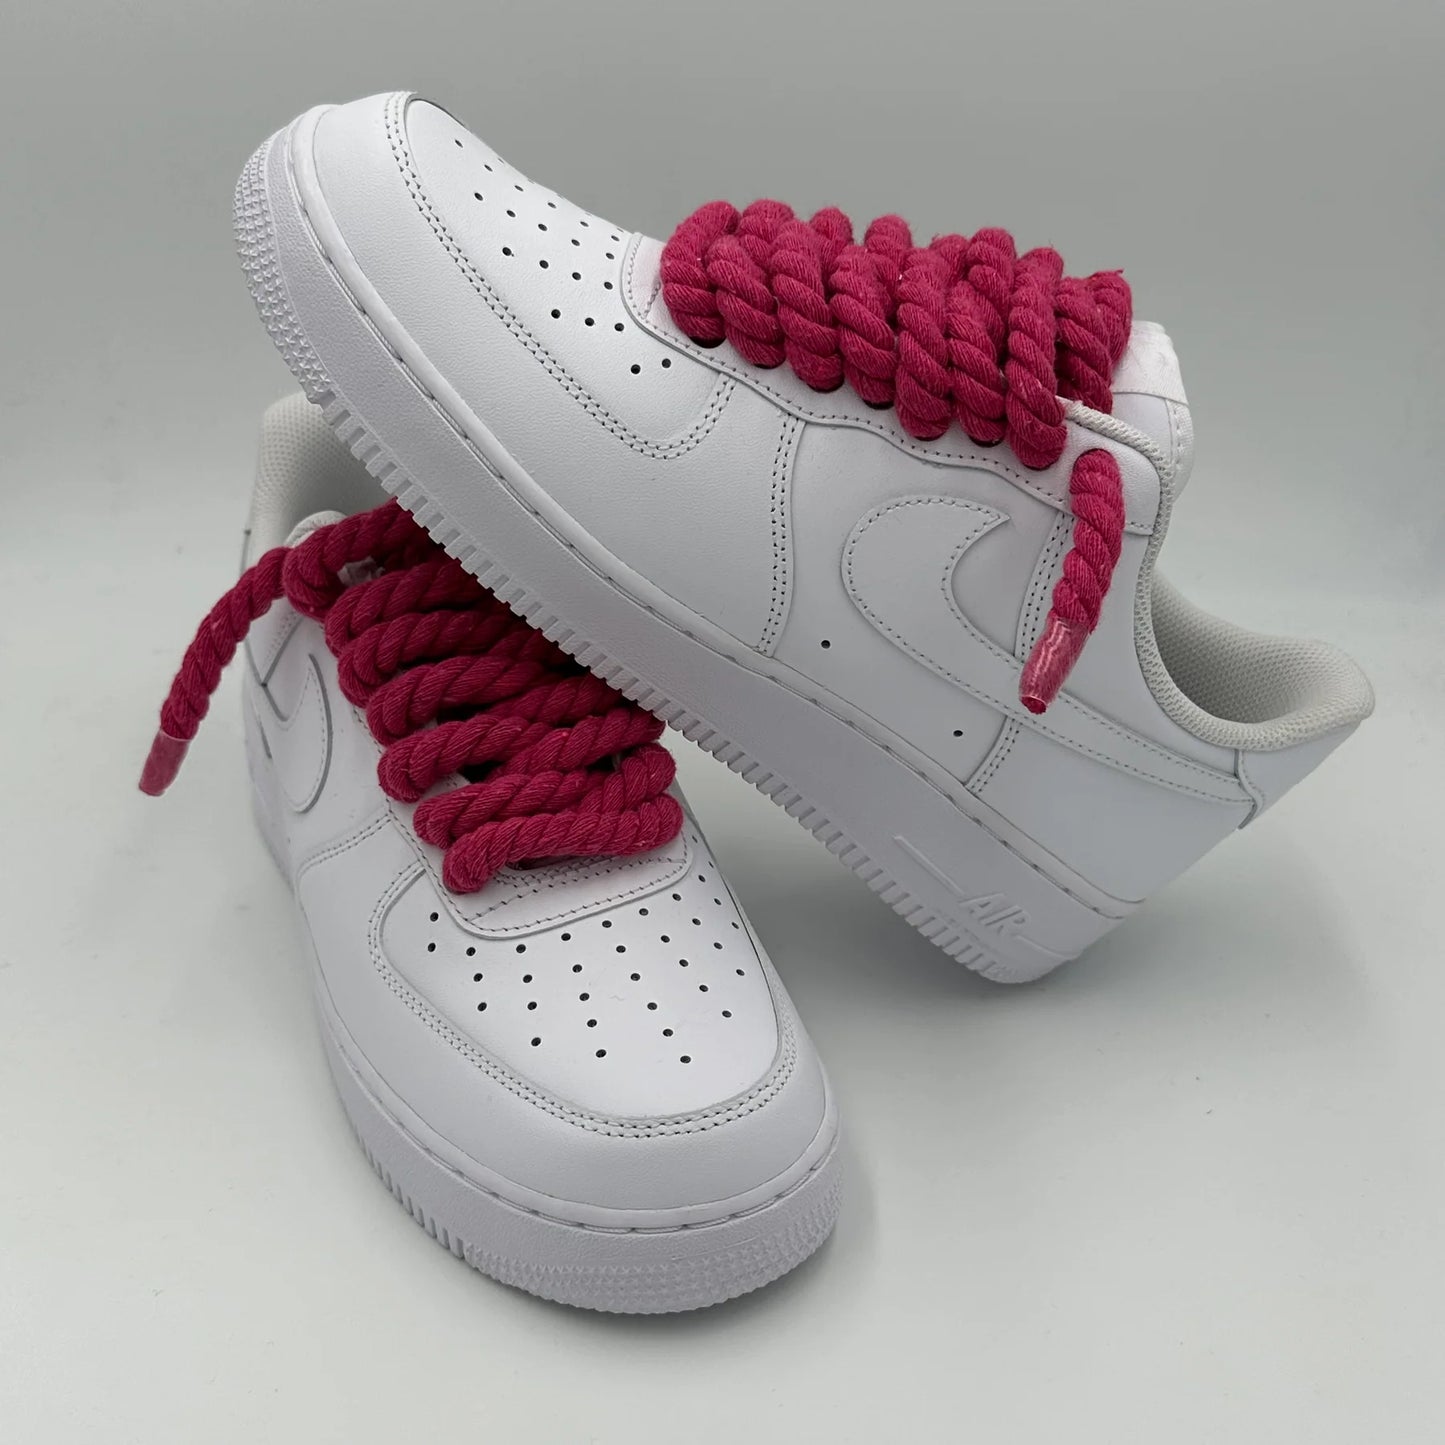 Pink/White Rope Laces